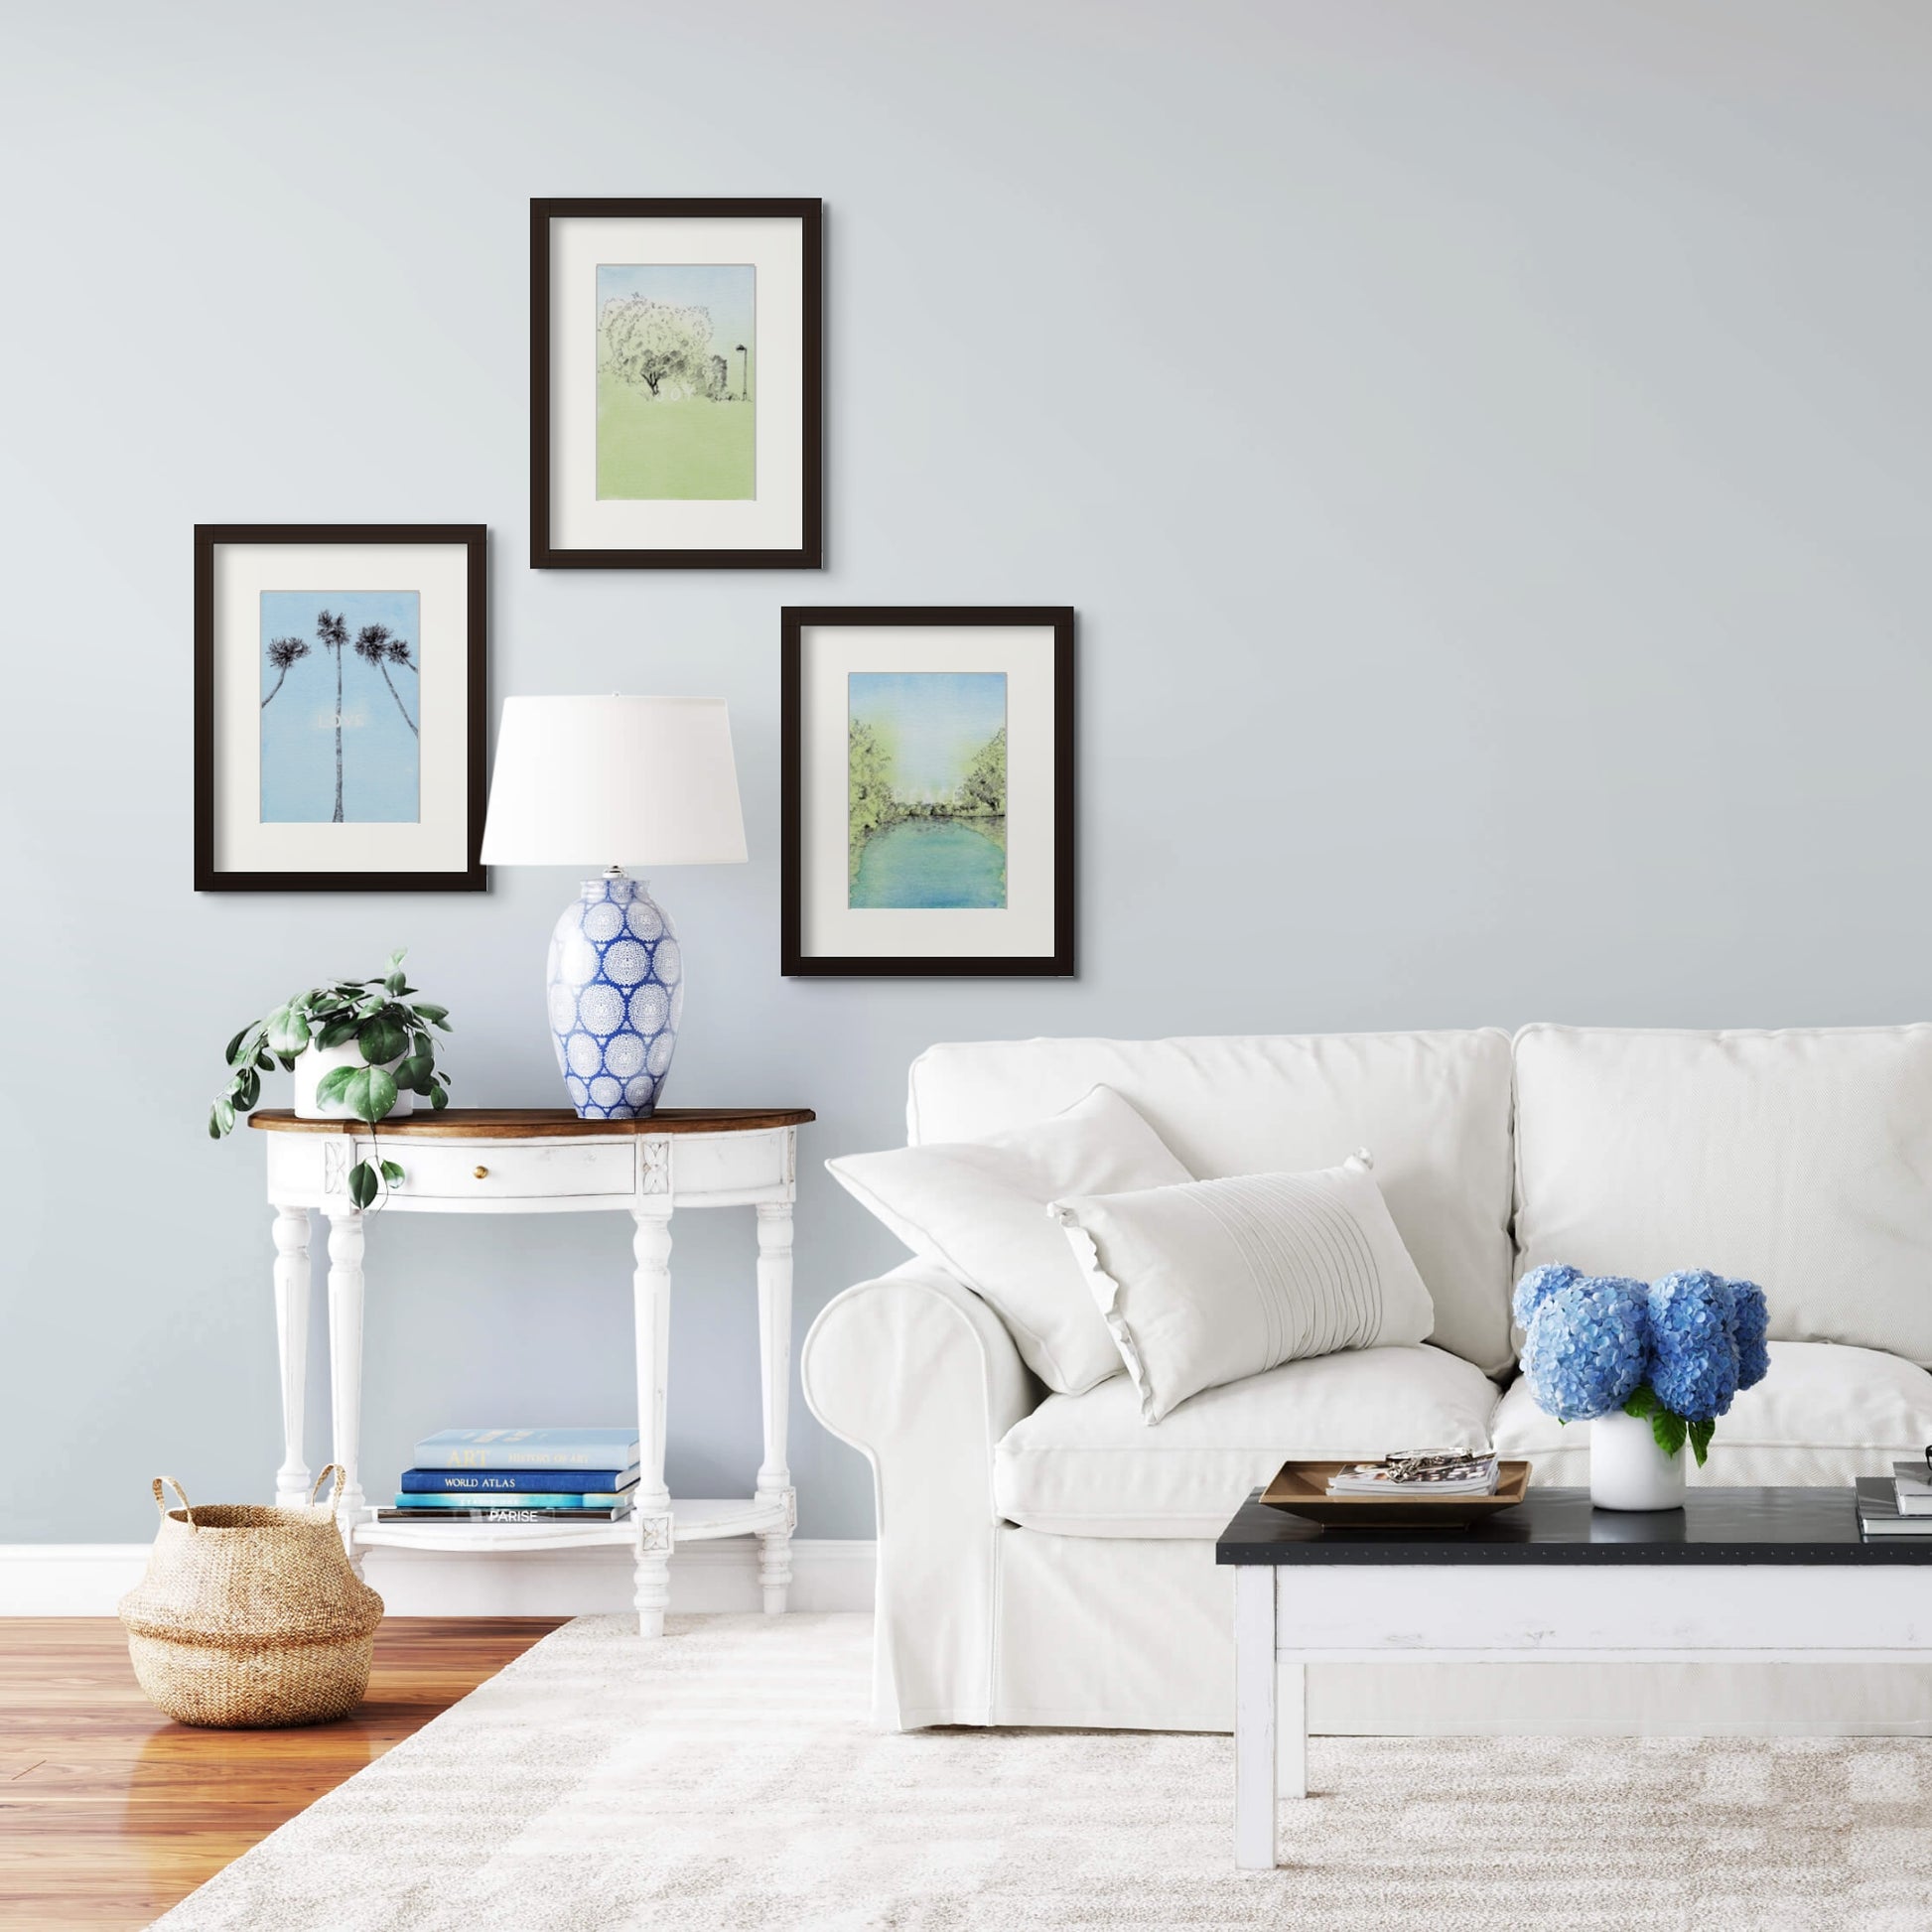 Image: set a three framed line drawing art prints of love, joy, peace in a living room